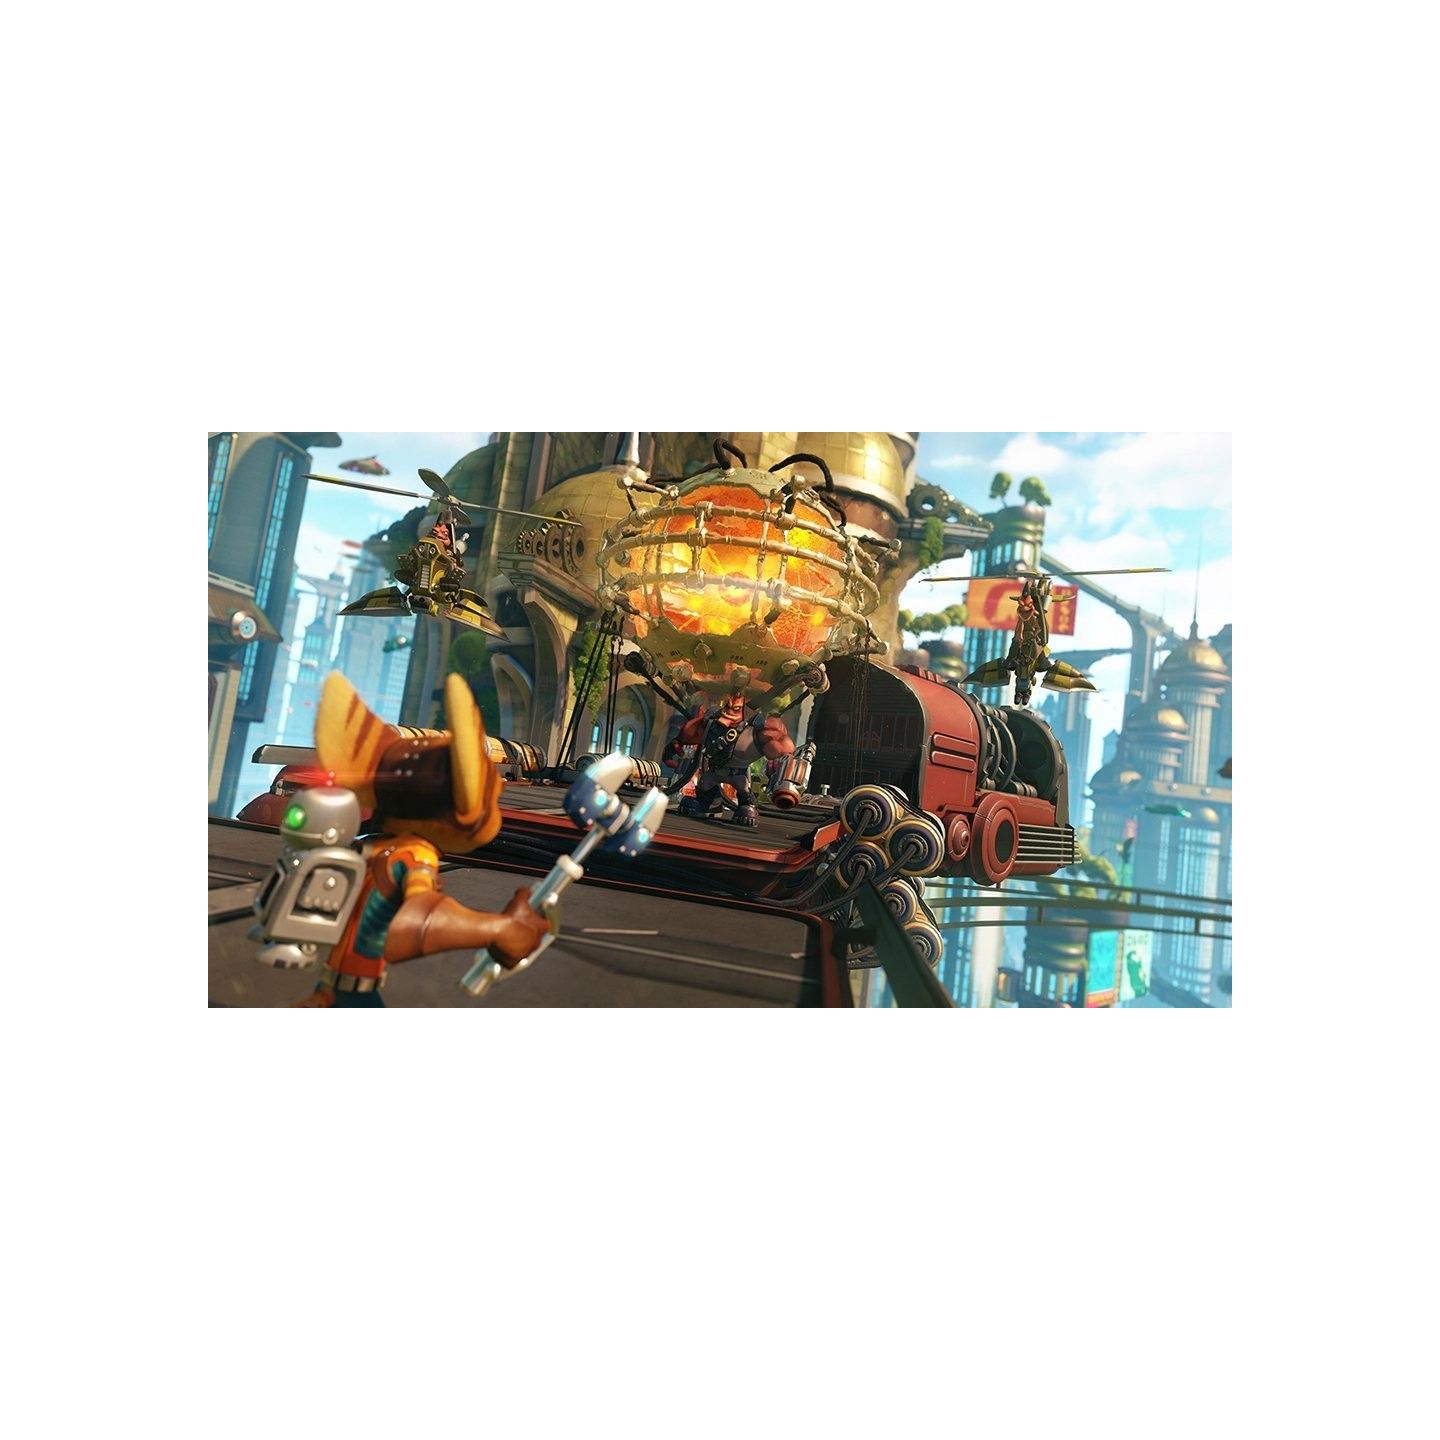 Ratchet & Clank THE GAME PS4 Japan